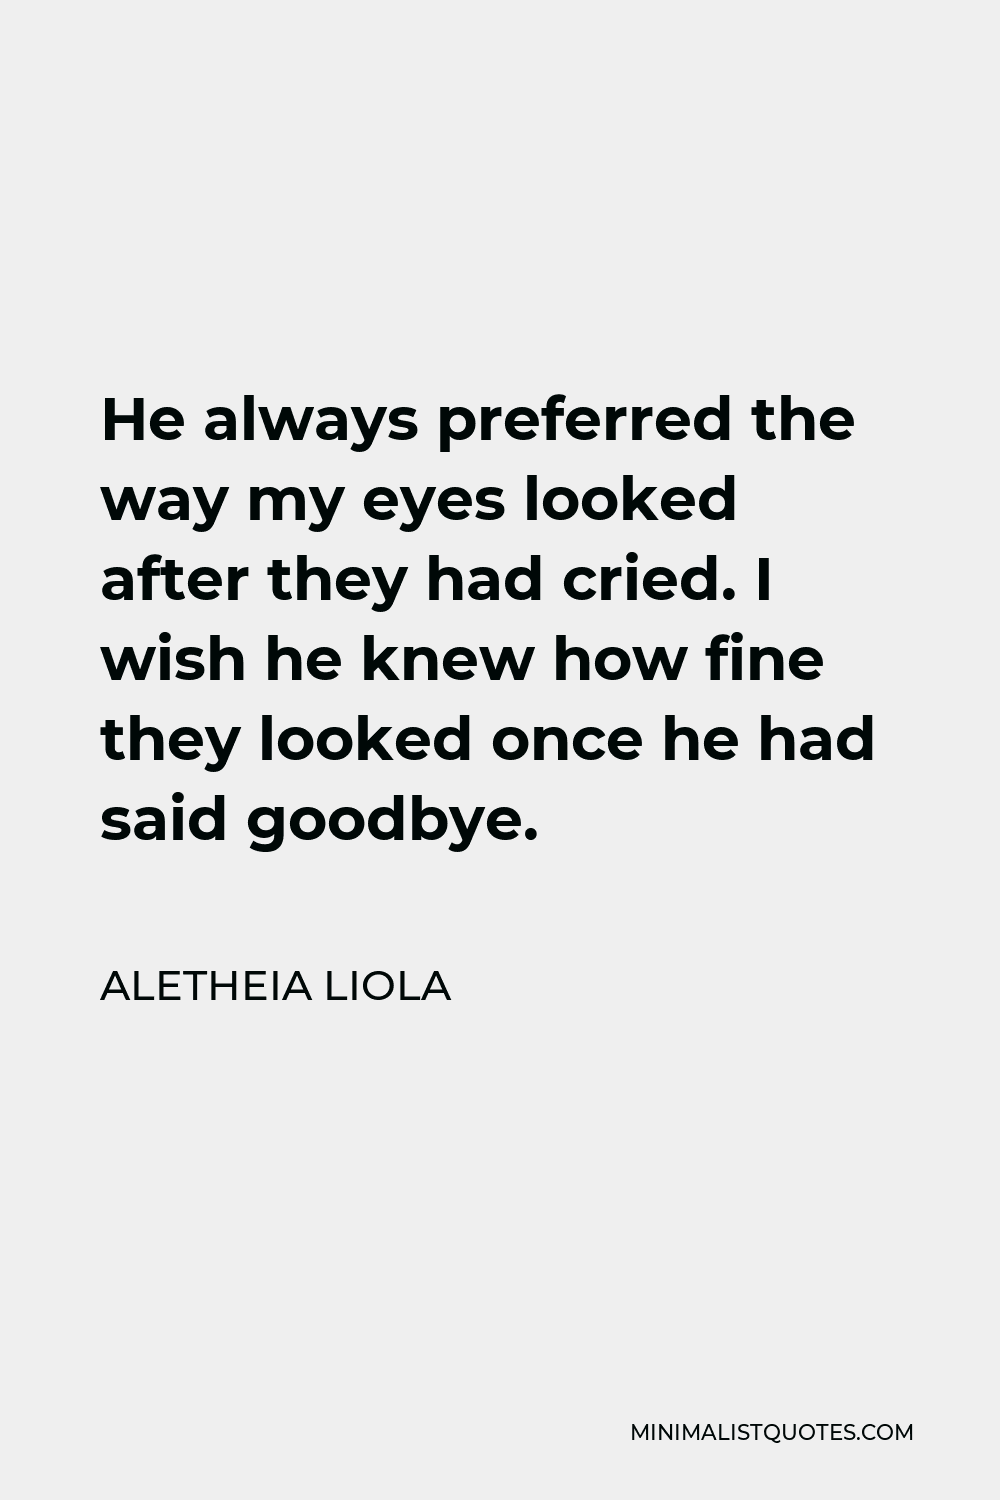 Aletheia Liola Quote - He always preferred the way my eyes looked after they had cried. I wish he knew how fine they looked once he had said goodbye.